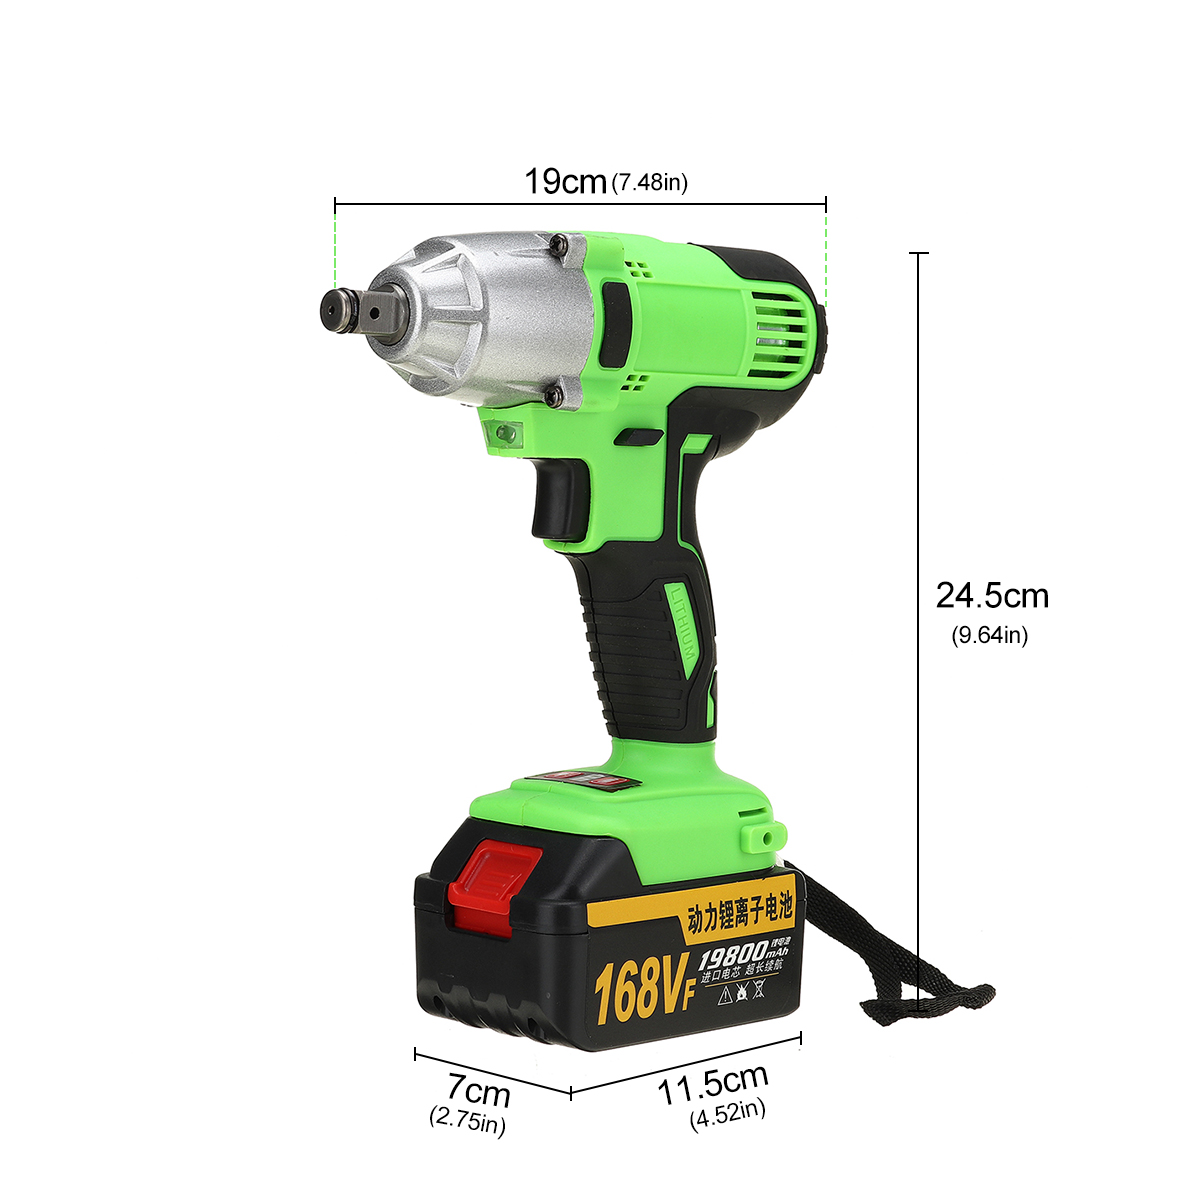 168VF-19800mAh-330NM-Electric-Impact-Wrench-Li-ion-Battery-Rechargeable-Power-Tool-1704614-10